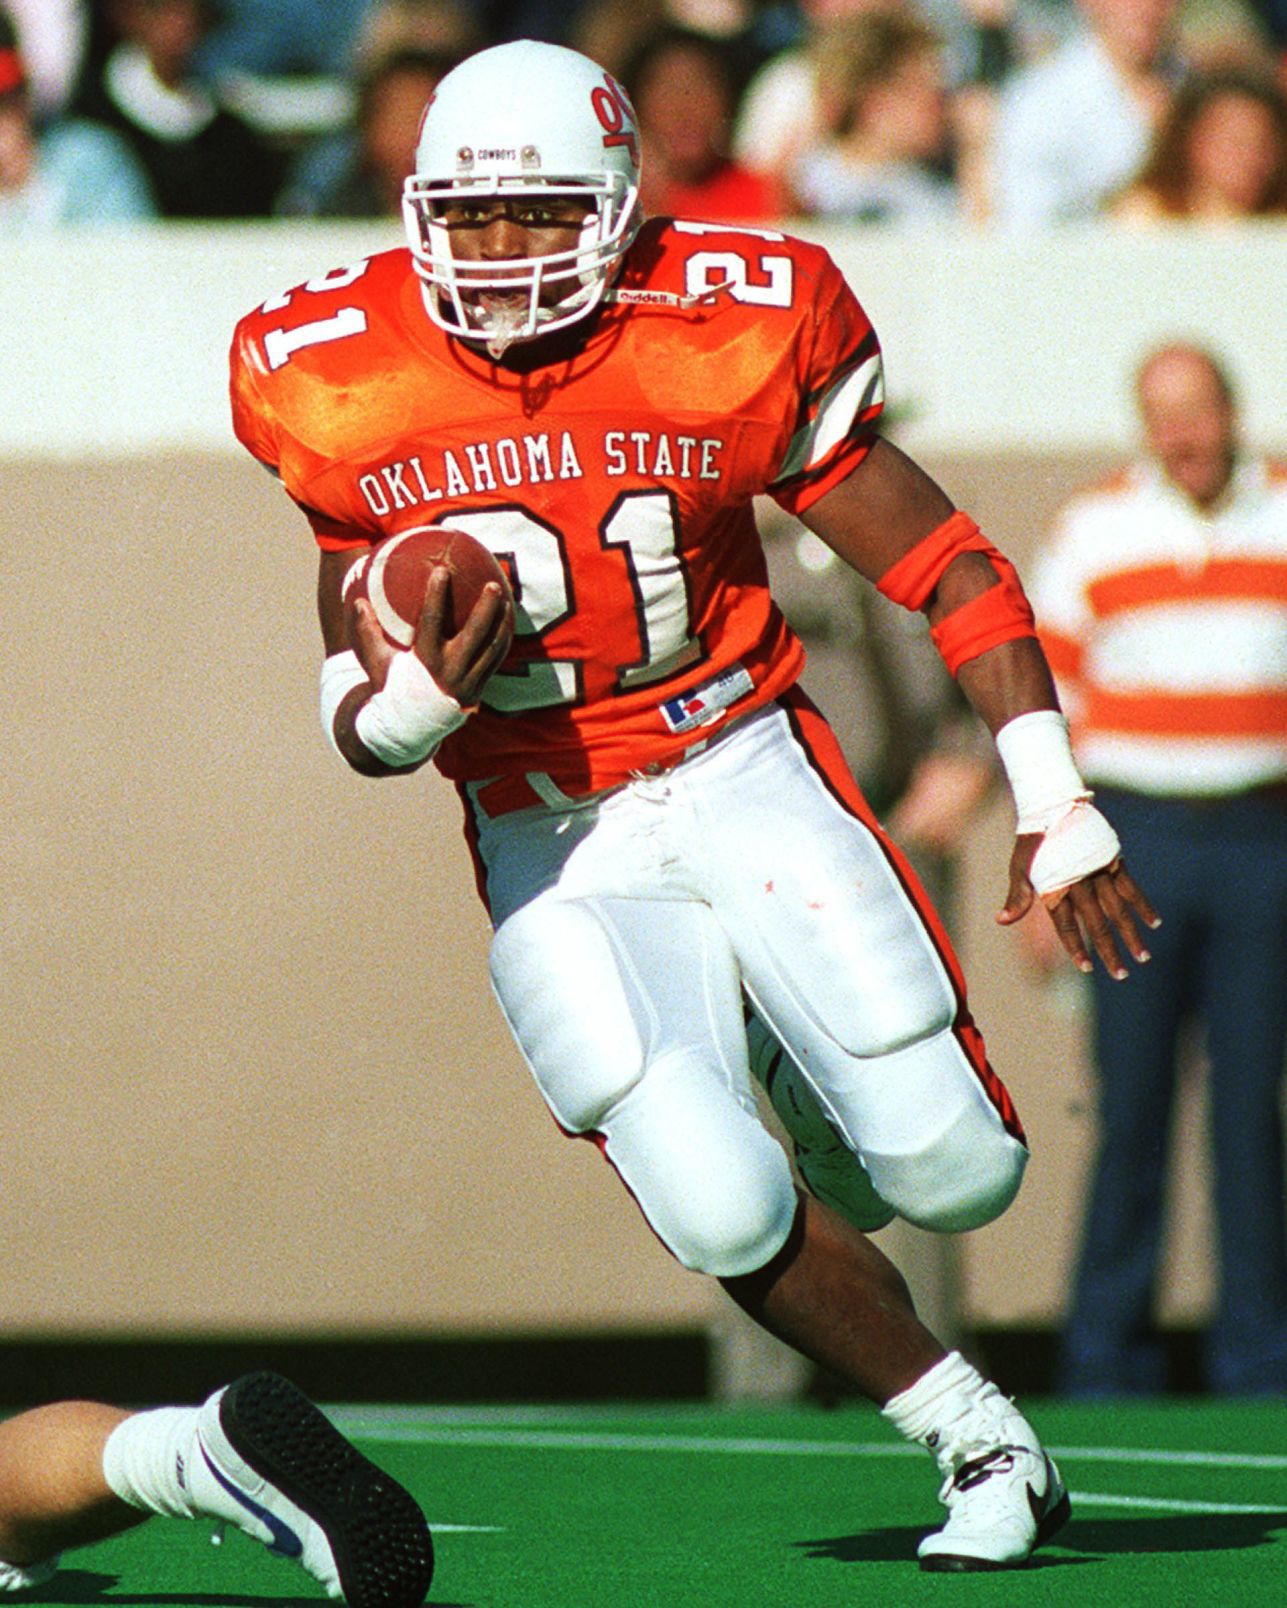 barry sanders throwback jersey oklahoma state